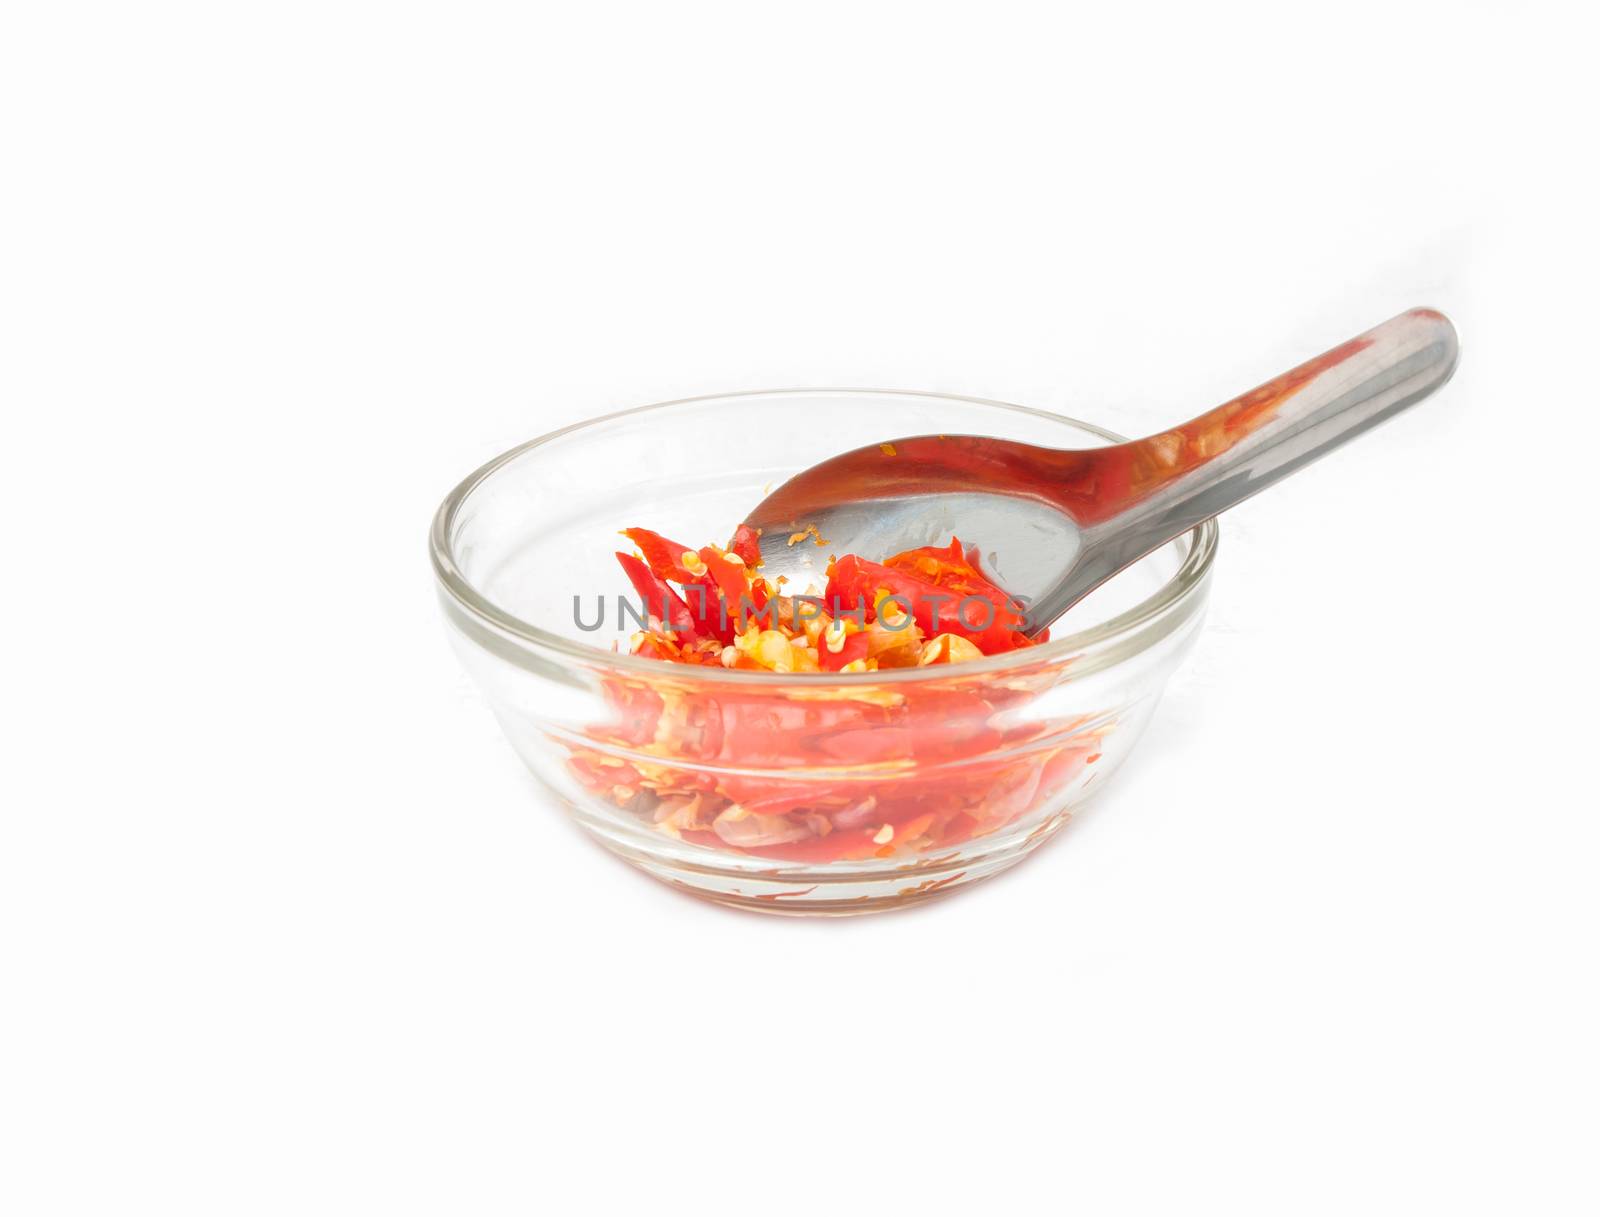 Crush chilli in the cup on white background